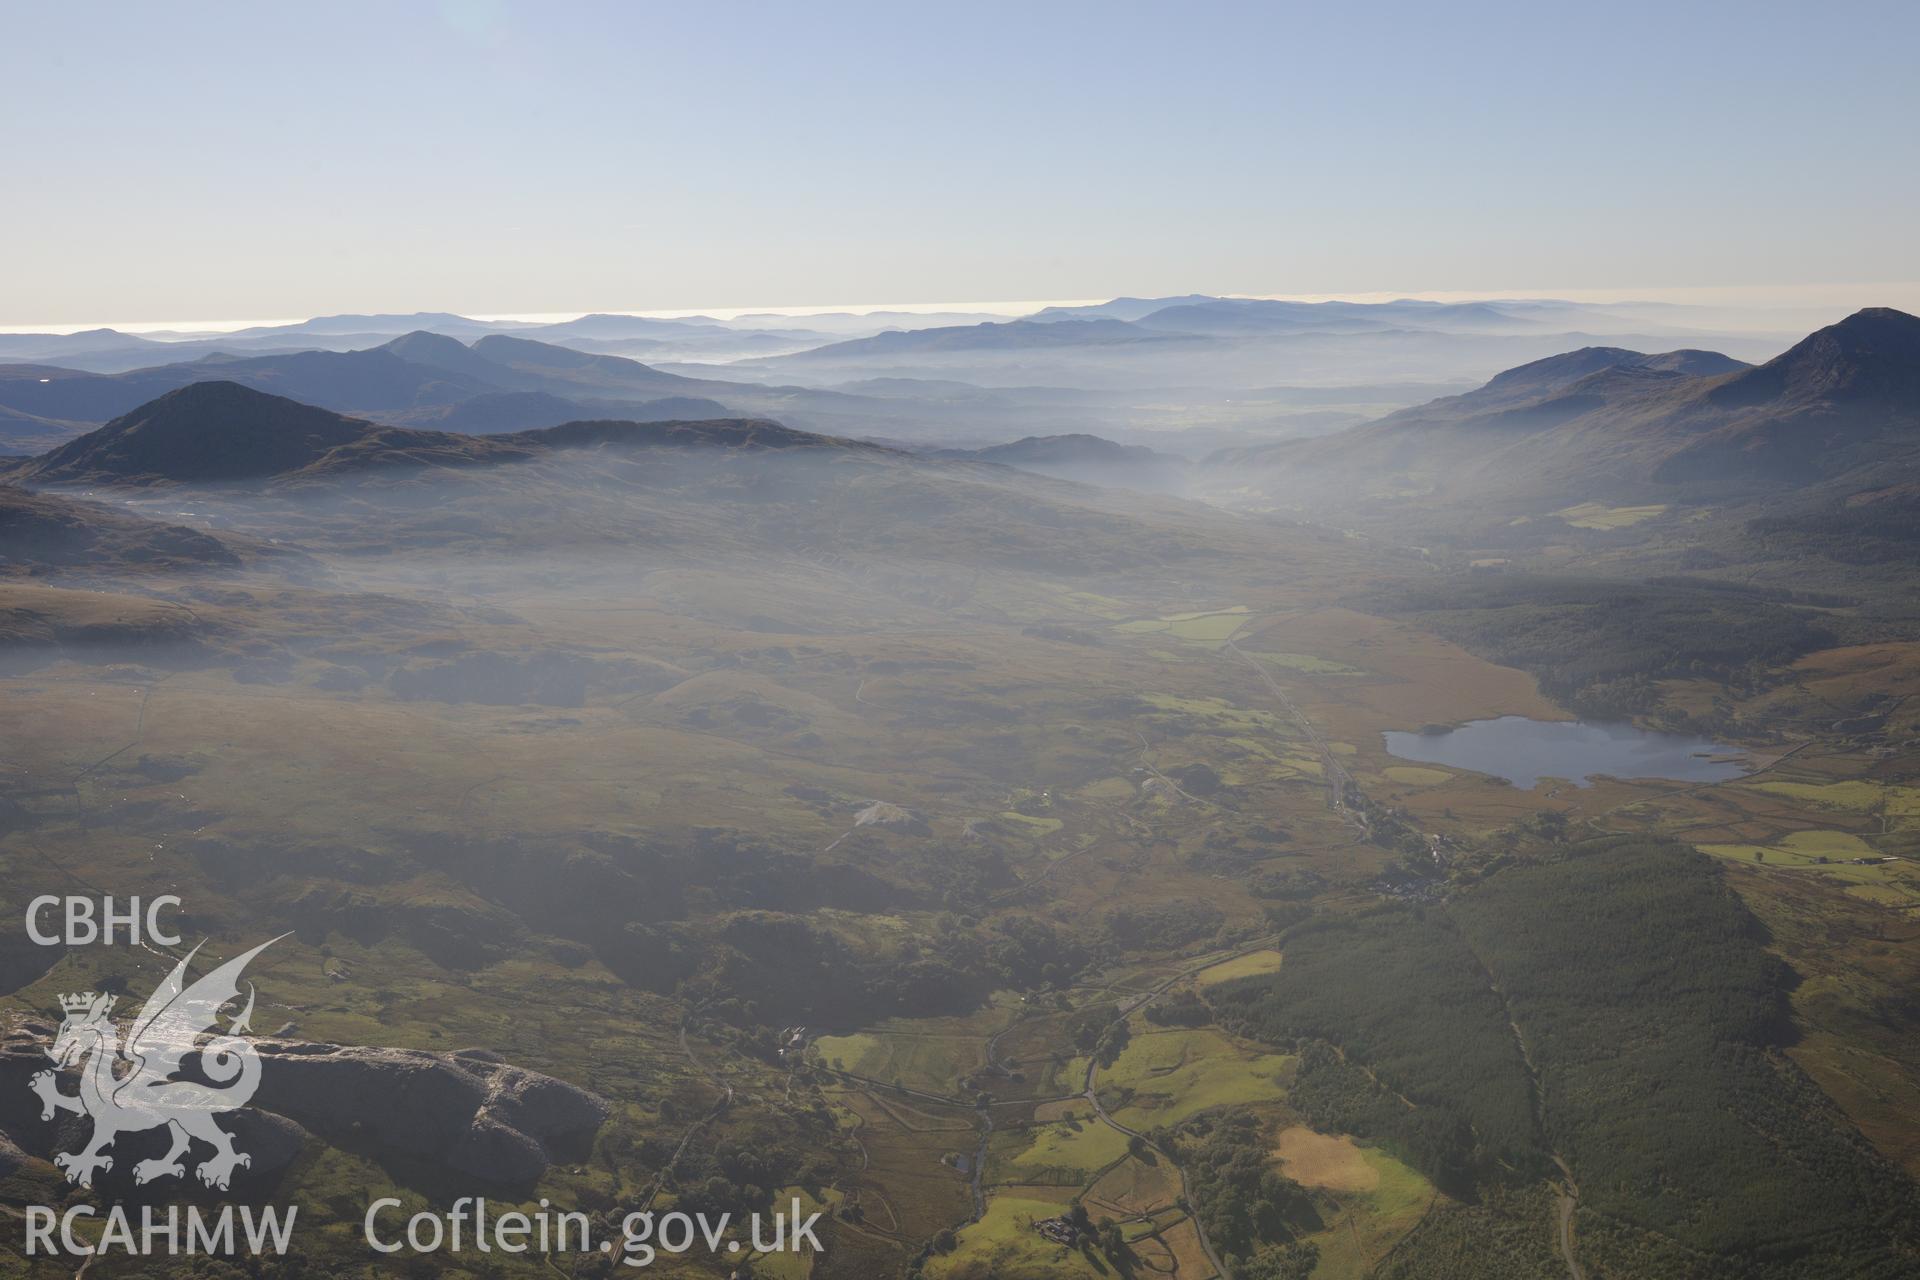 Glanrafon slate quarry and Llyn y Gader beyond, Capel Garmon. Oblique aerial photograph taken during the Royal Commission's programme of archaeological aerial reconnaissance by Toby Driver on 2nd October 2015.